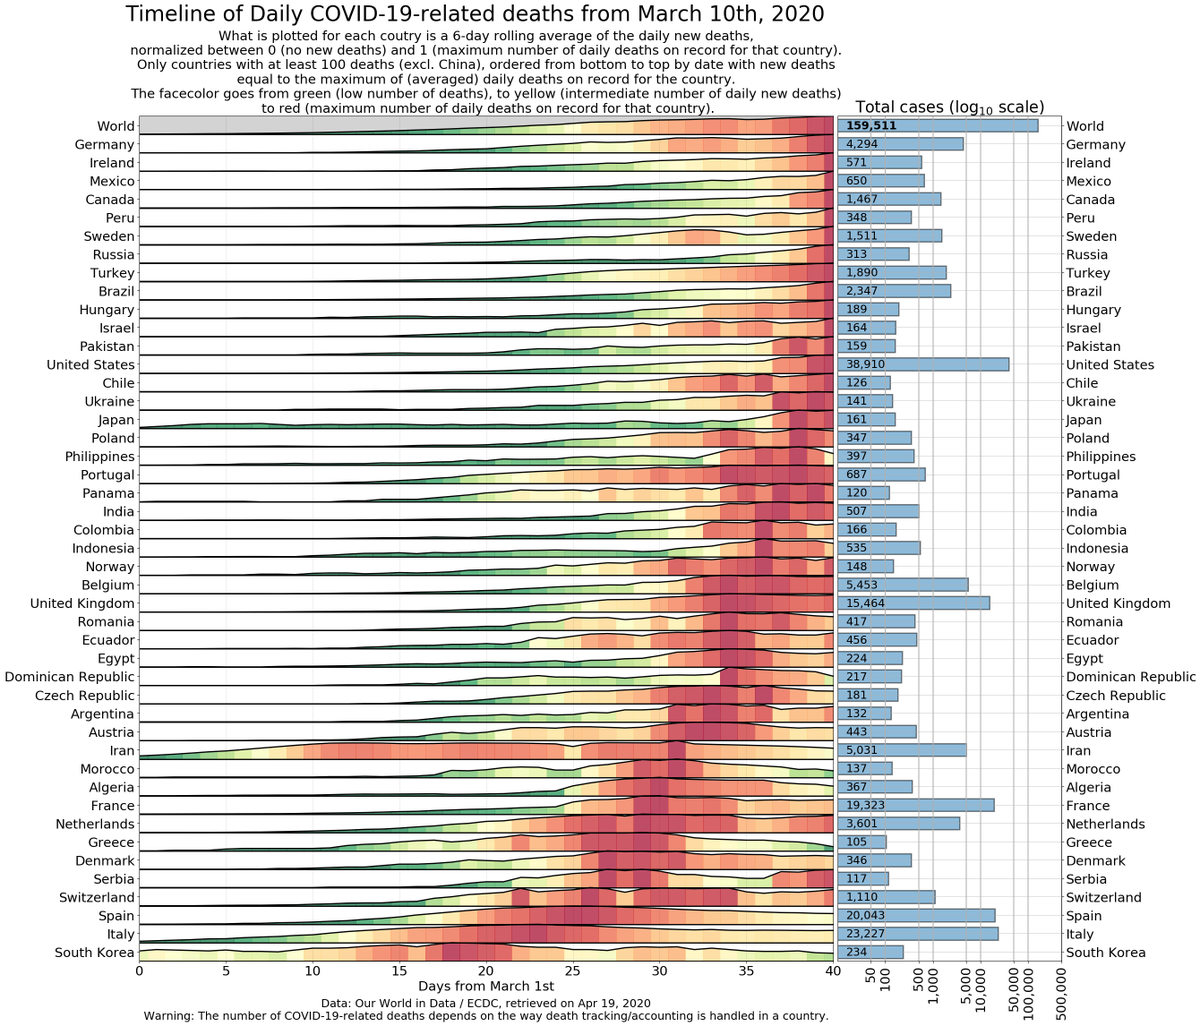 Timelines for daily cases and daily deaths: Countries are ordered from bottom to top based on the date of the (first) largest number recorded so-far. Countries at the top are still dealing with a surge. Worth going over this to check the variety in the dynamics of the pandemic.